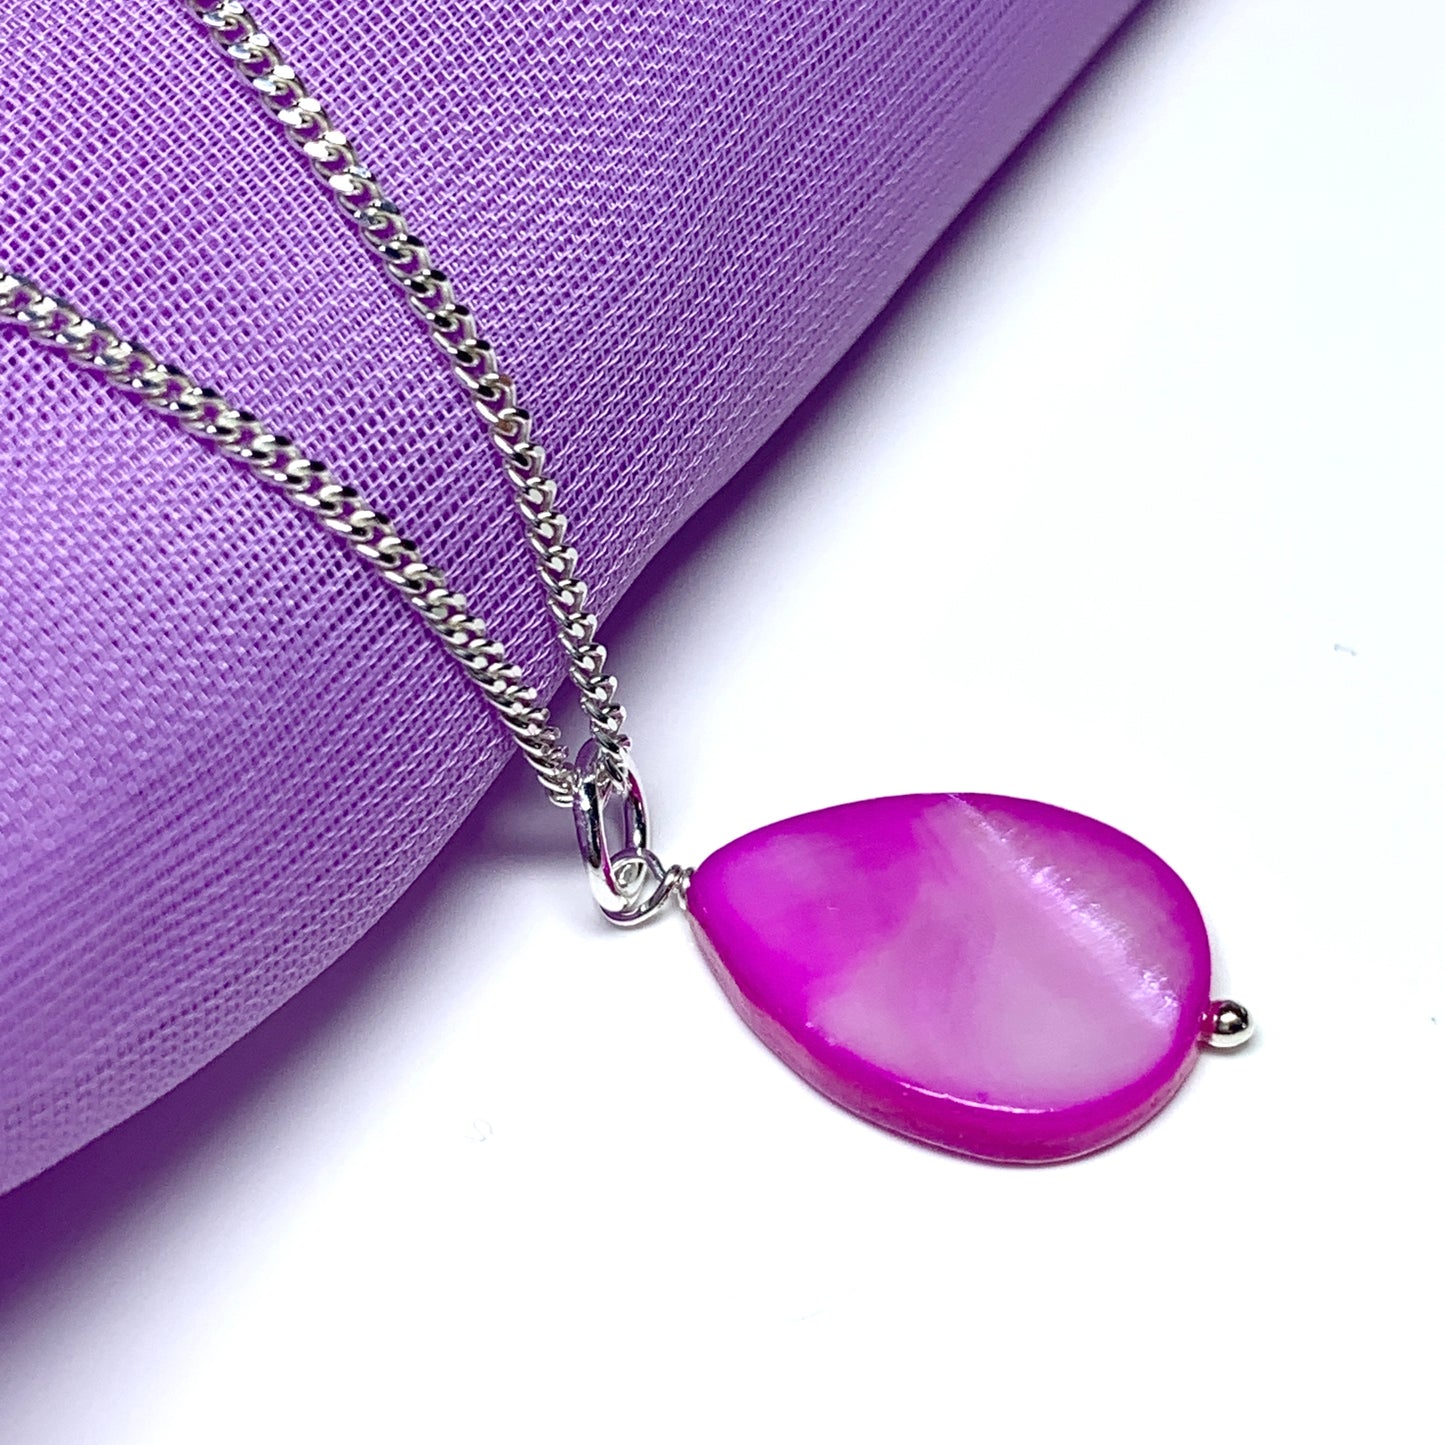 Pink Mother of Pearl Balloon Sterling Silver Necklace